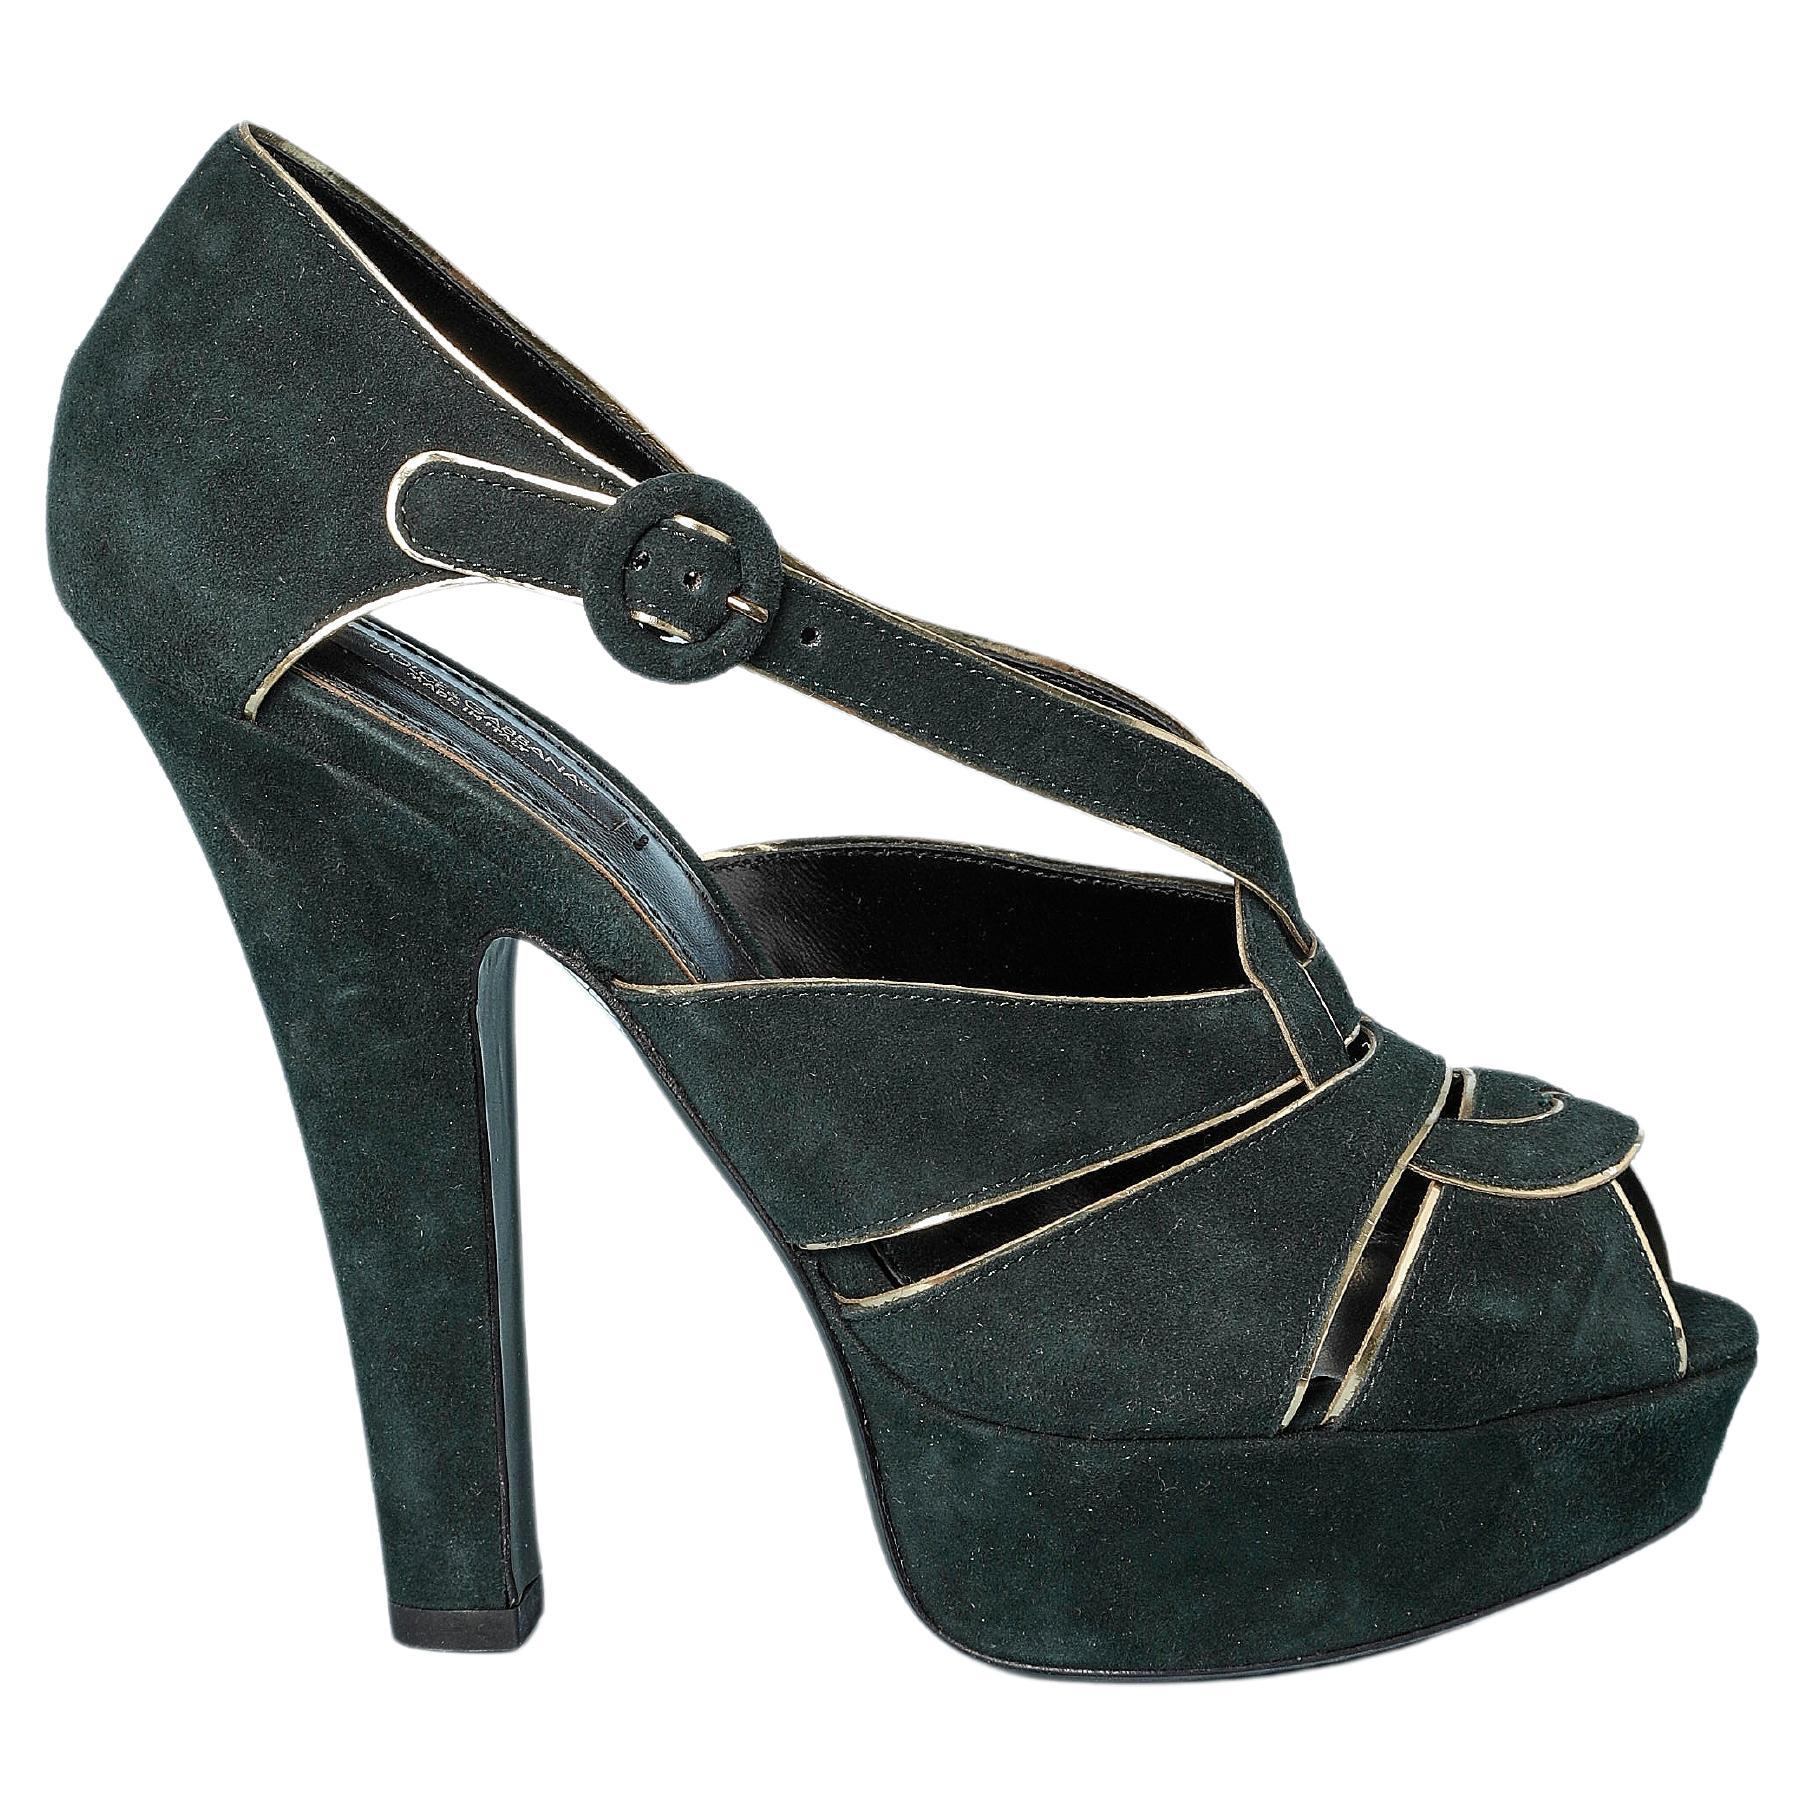 Platform sandal in green suede and gold piping Dolce & Gabbana NEW For Sale